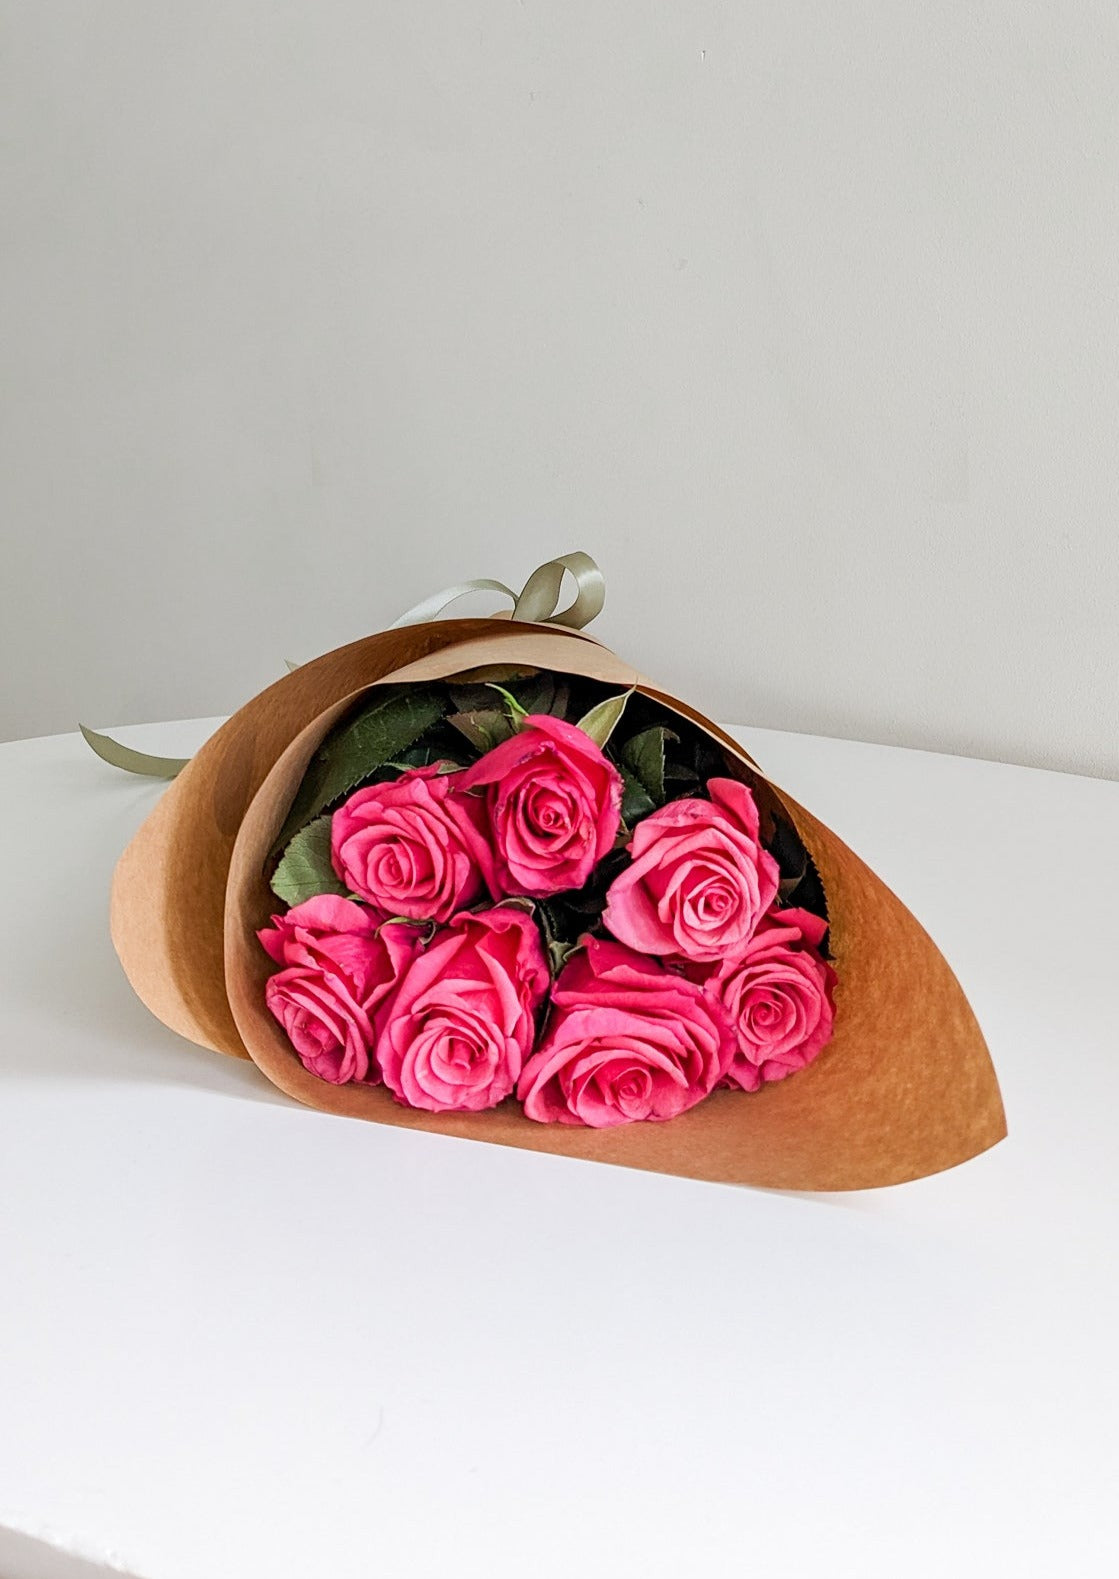 Assorted Roses Bouquet